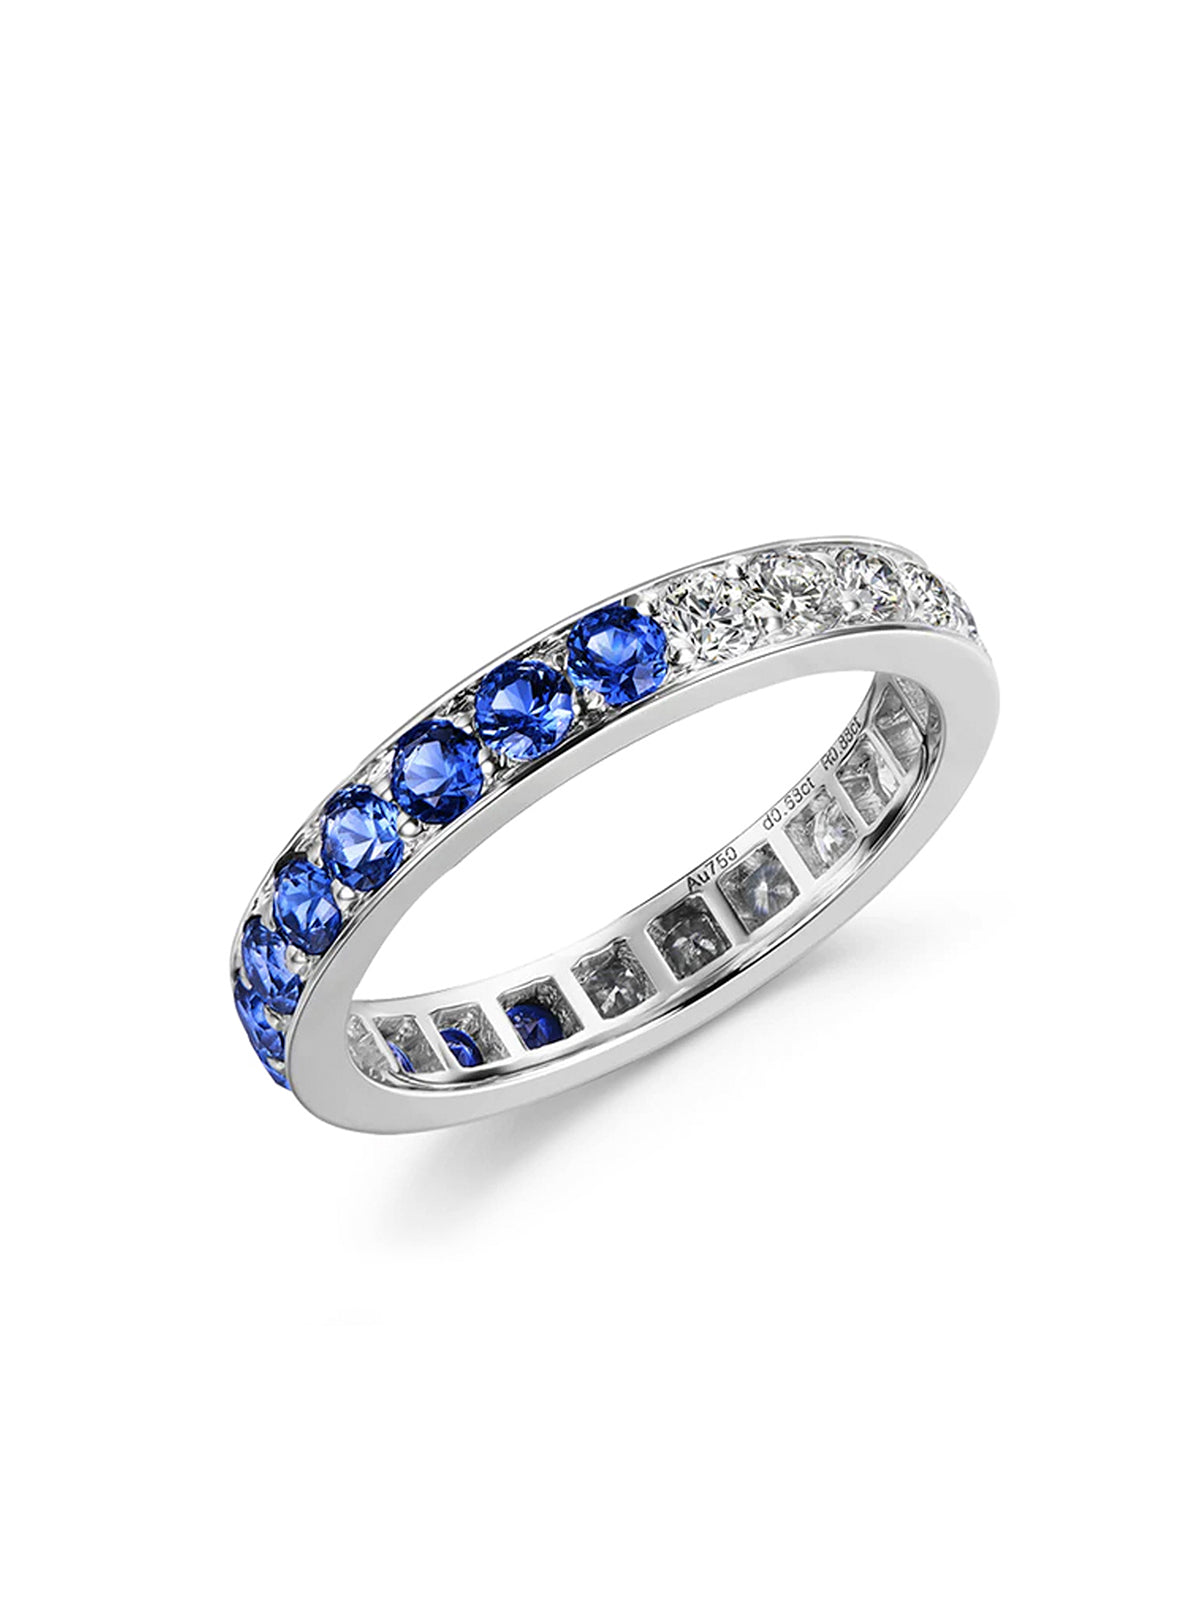 Me | You Half-And-Half Eternity Ring